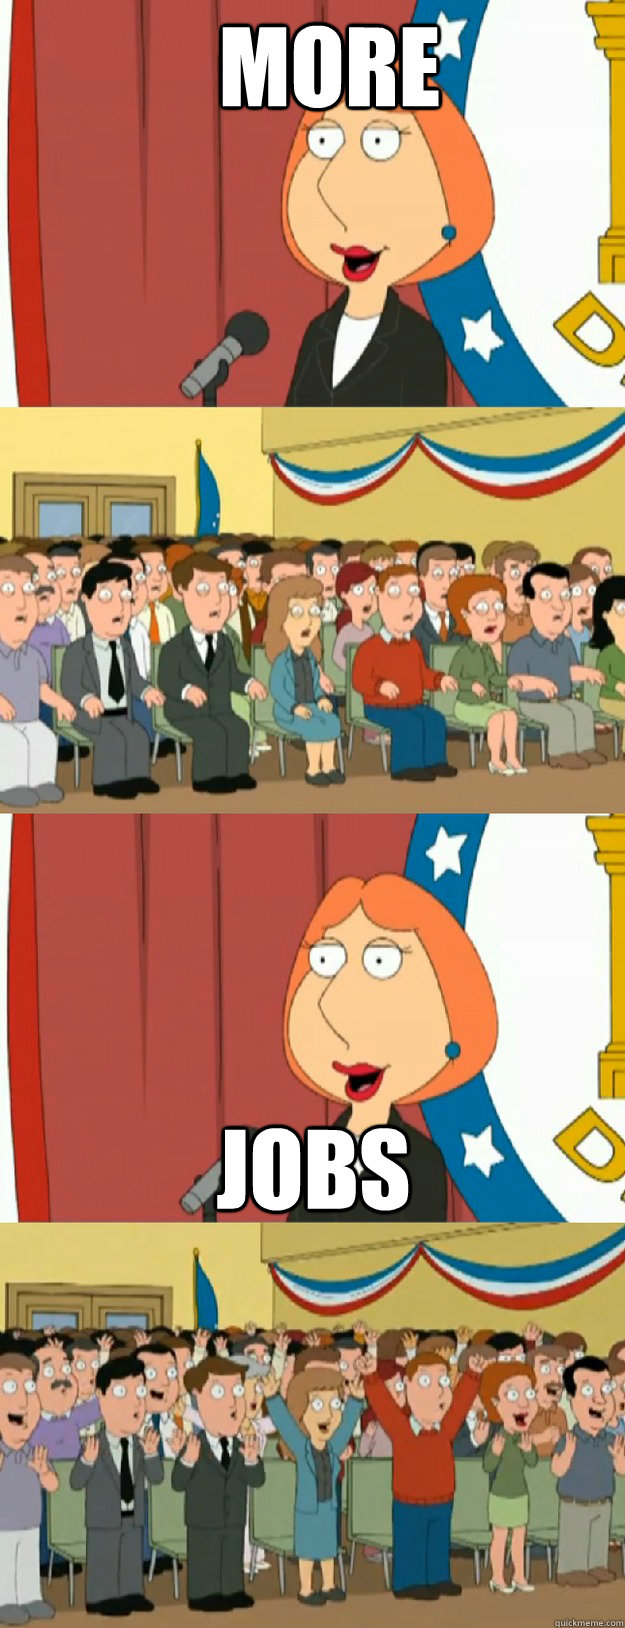 More Jobs - More Jobs  Lois Griffin